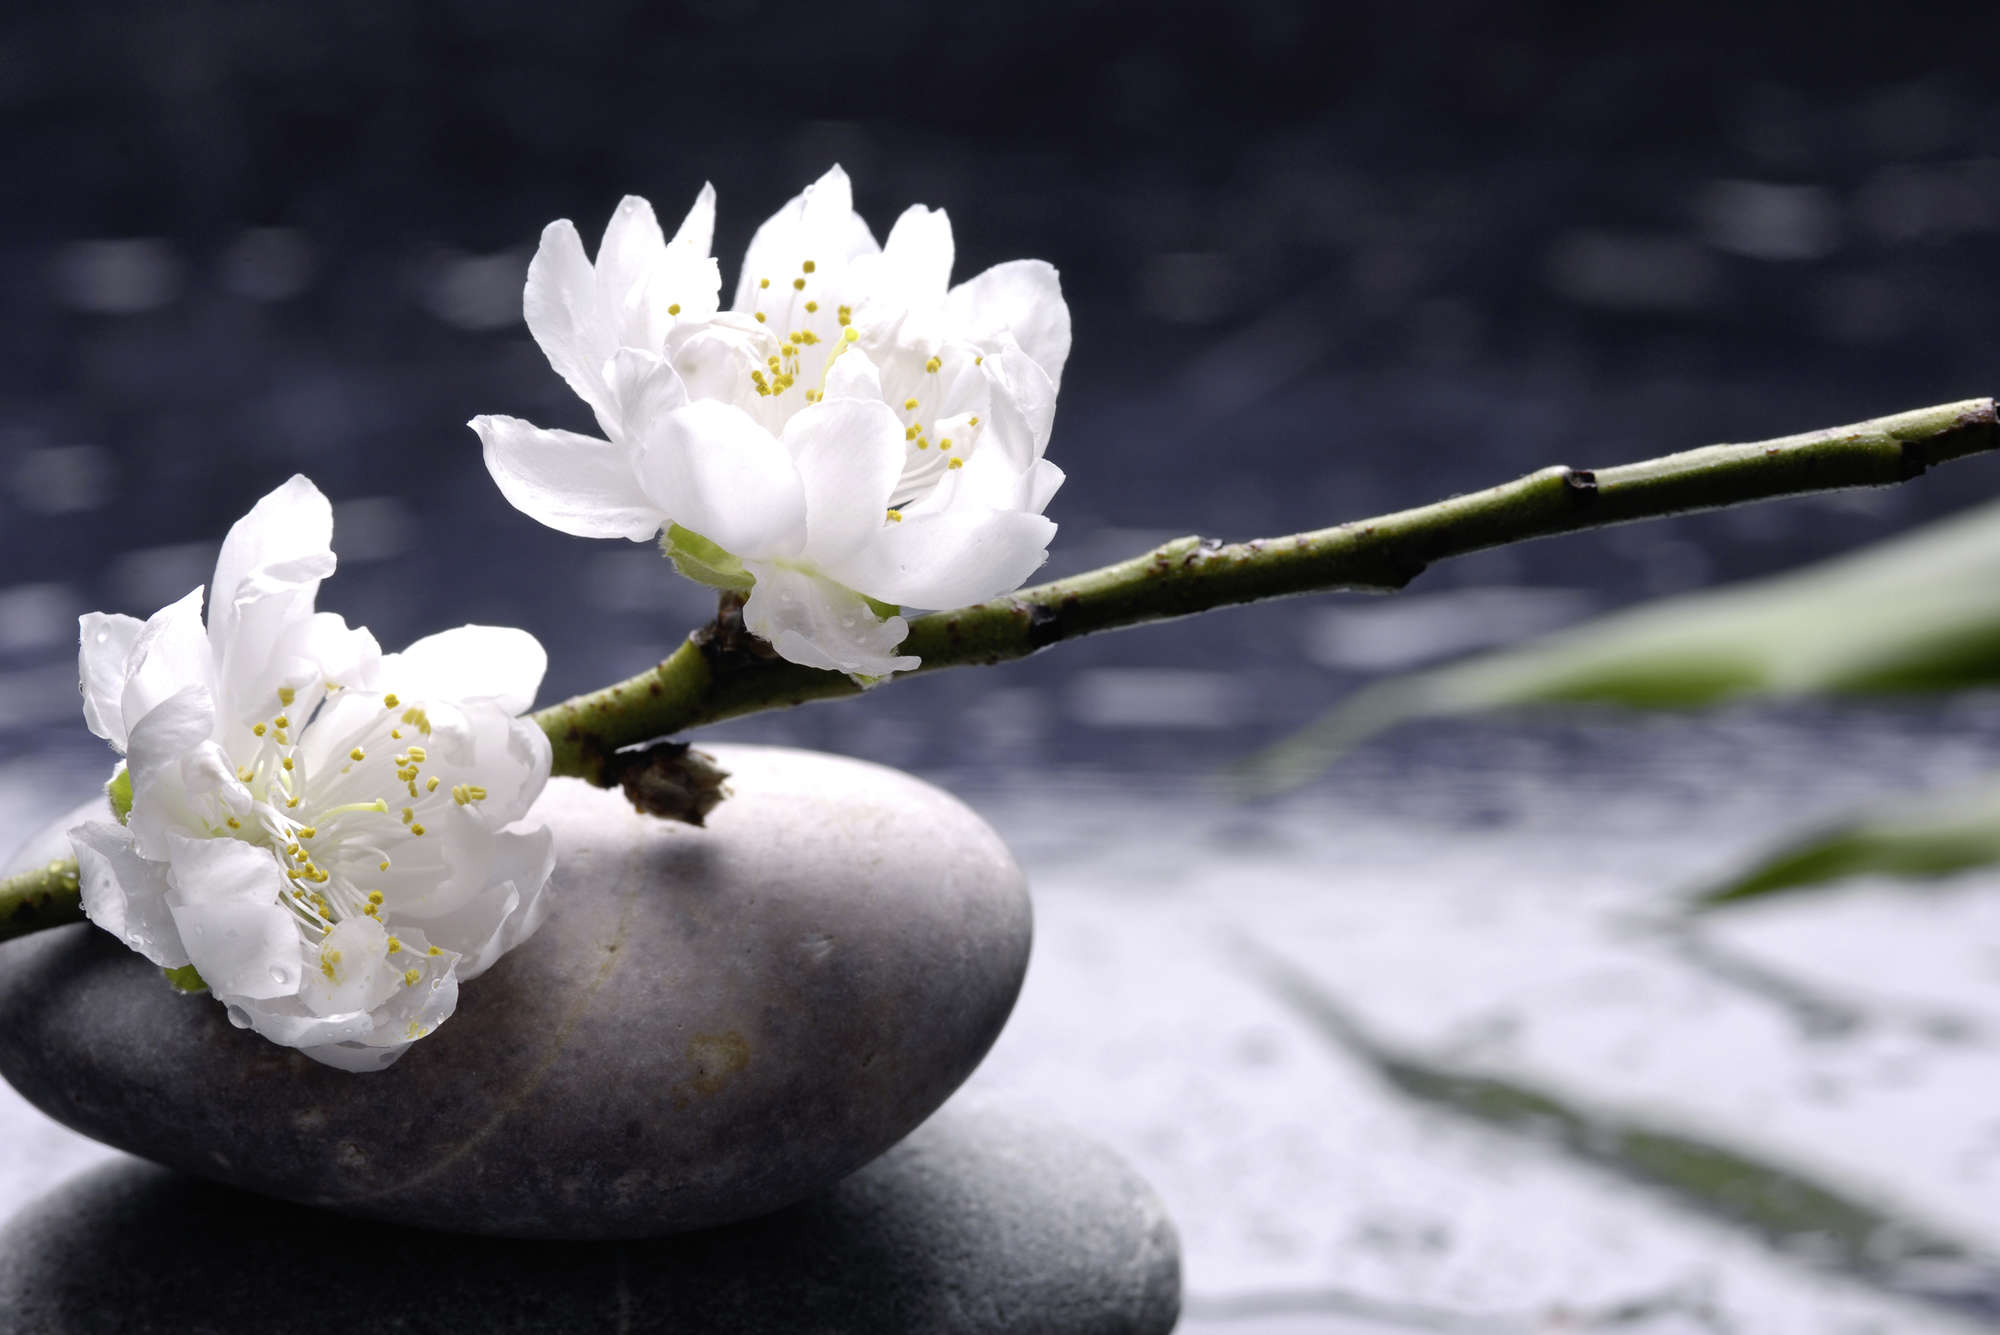             Photo wallpaper Wellness Stones with Blossoms - Premium Smooth Non-woven
        